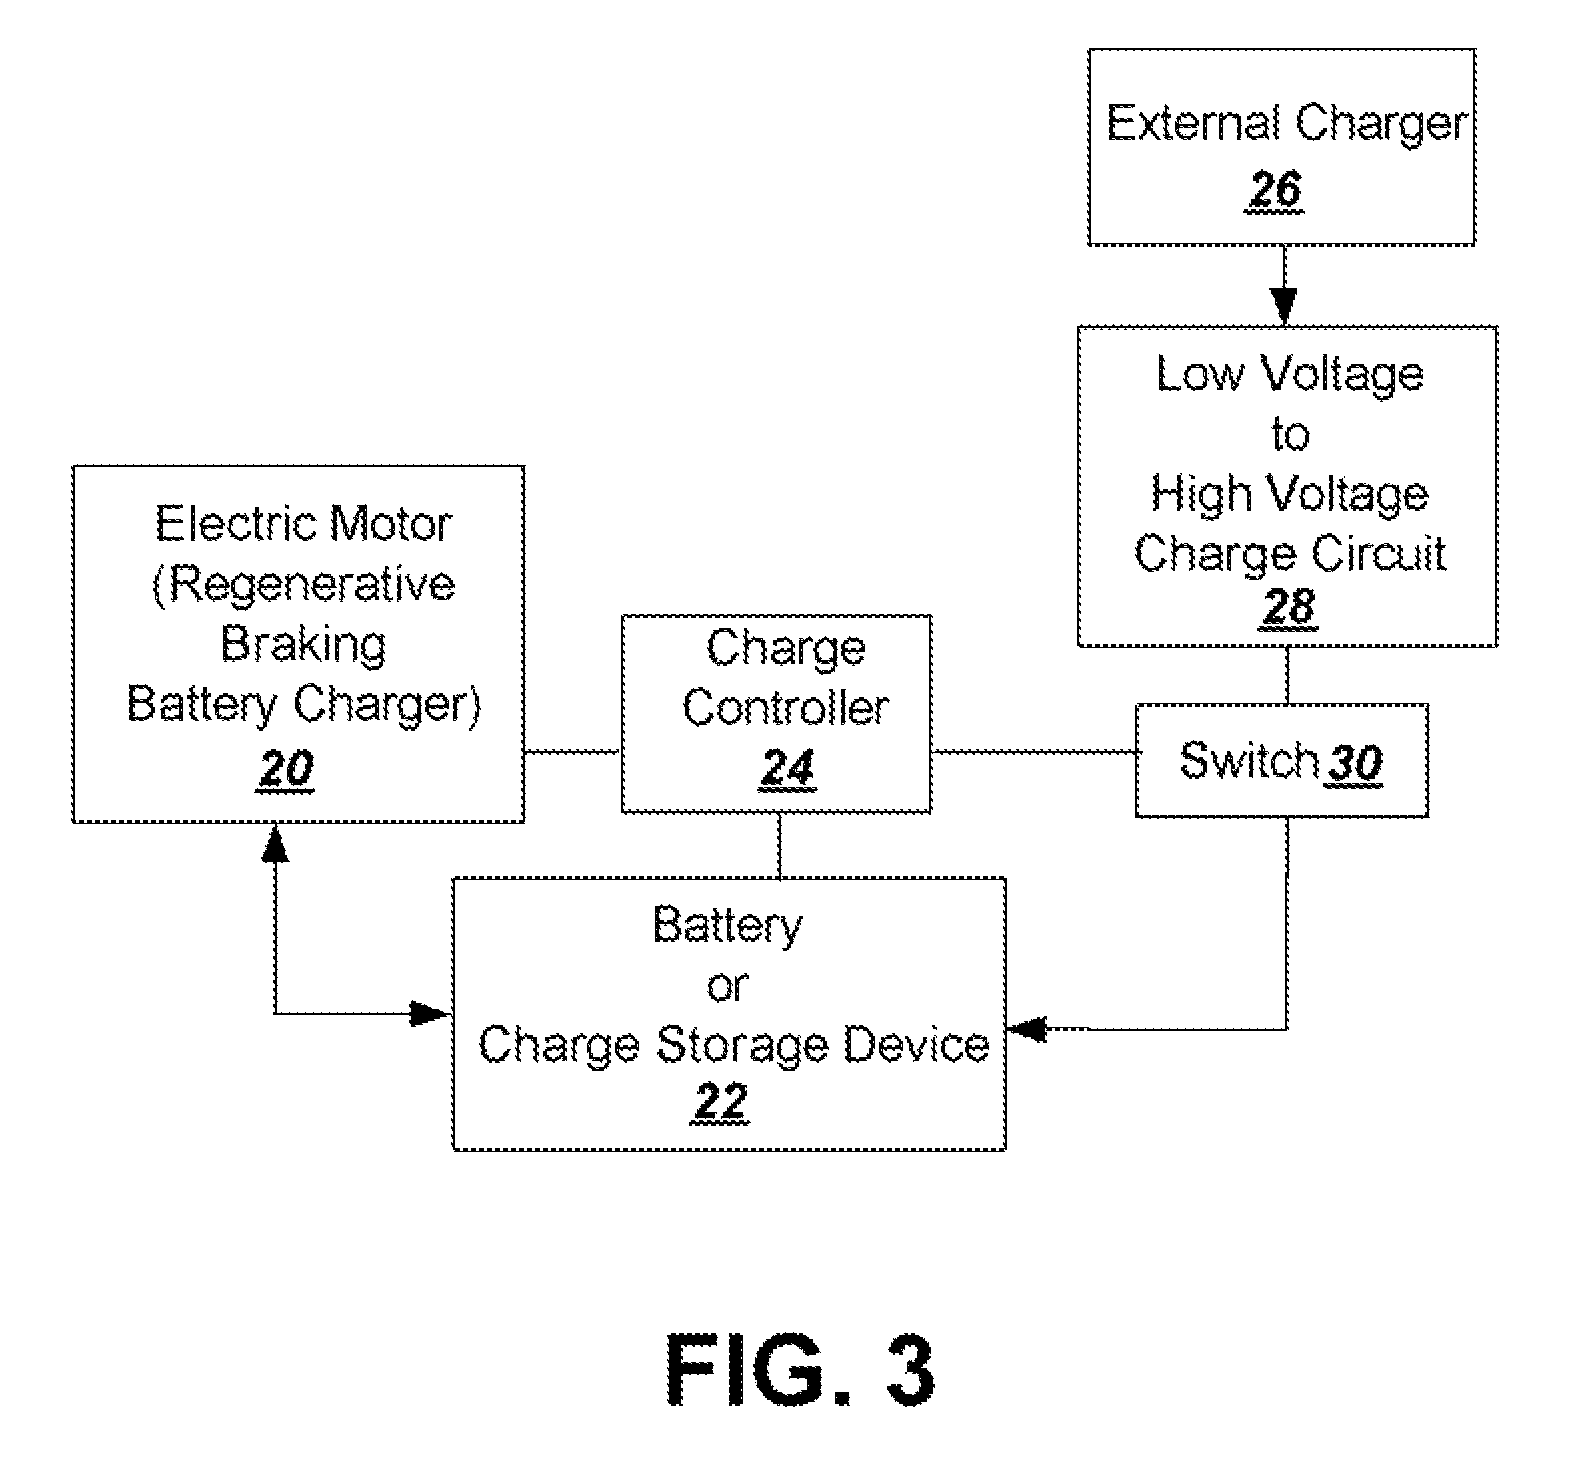 Current clamping parallel battery charging system to supplement regenerative braking in electric vehicle